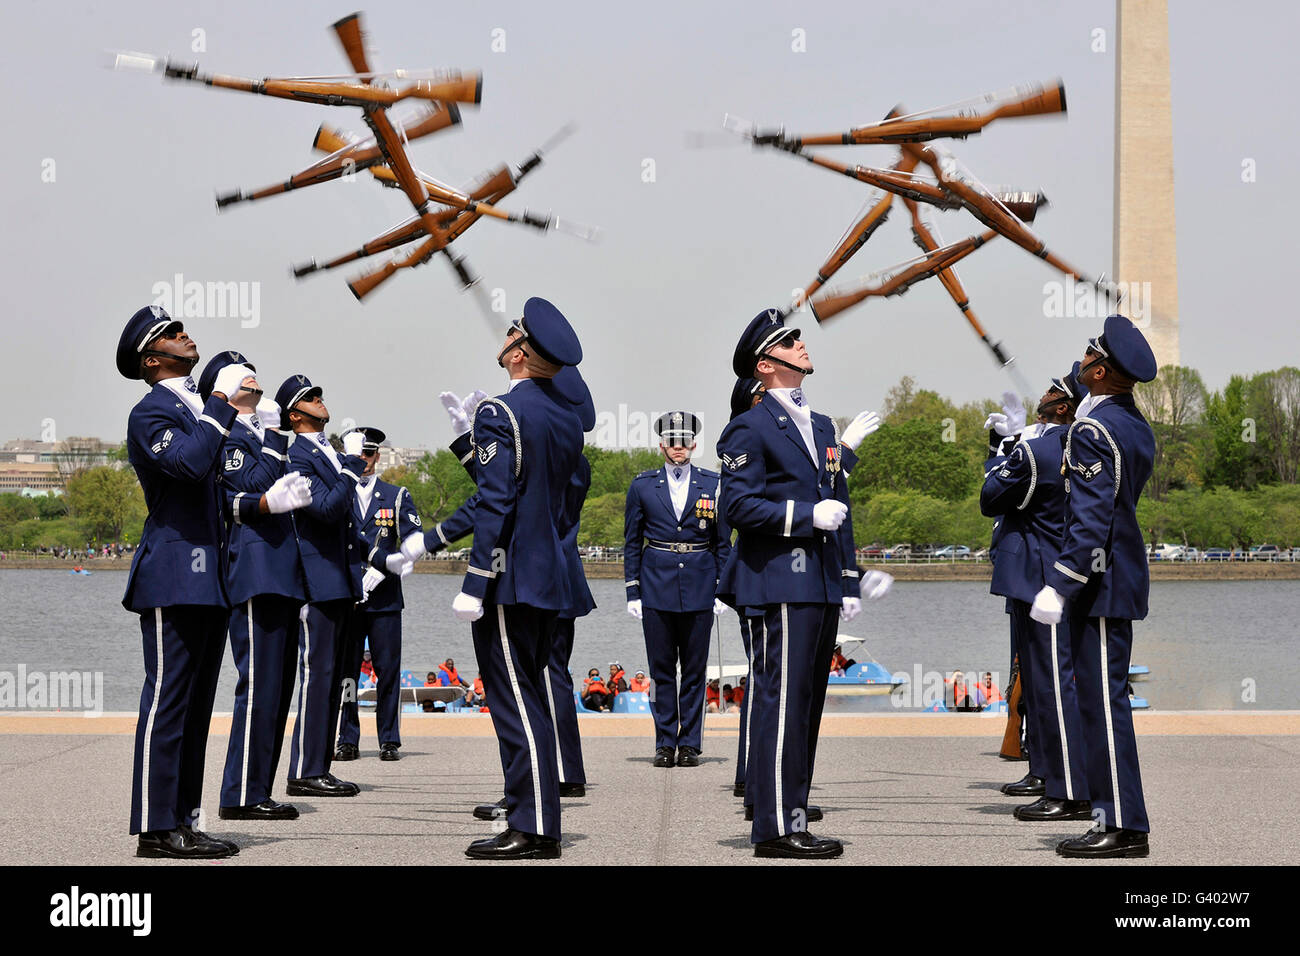 The United States Air Force Honor Guard Drill Team. Stock Photo